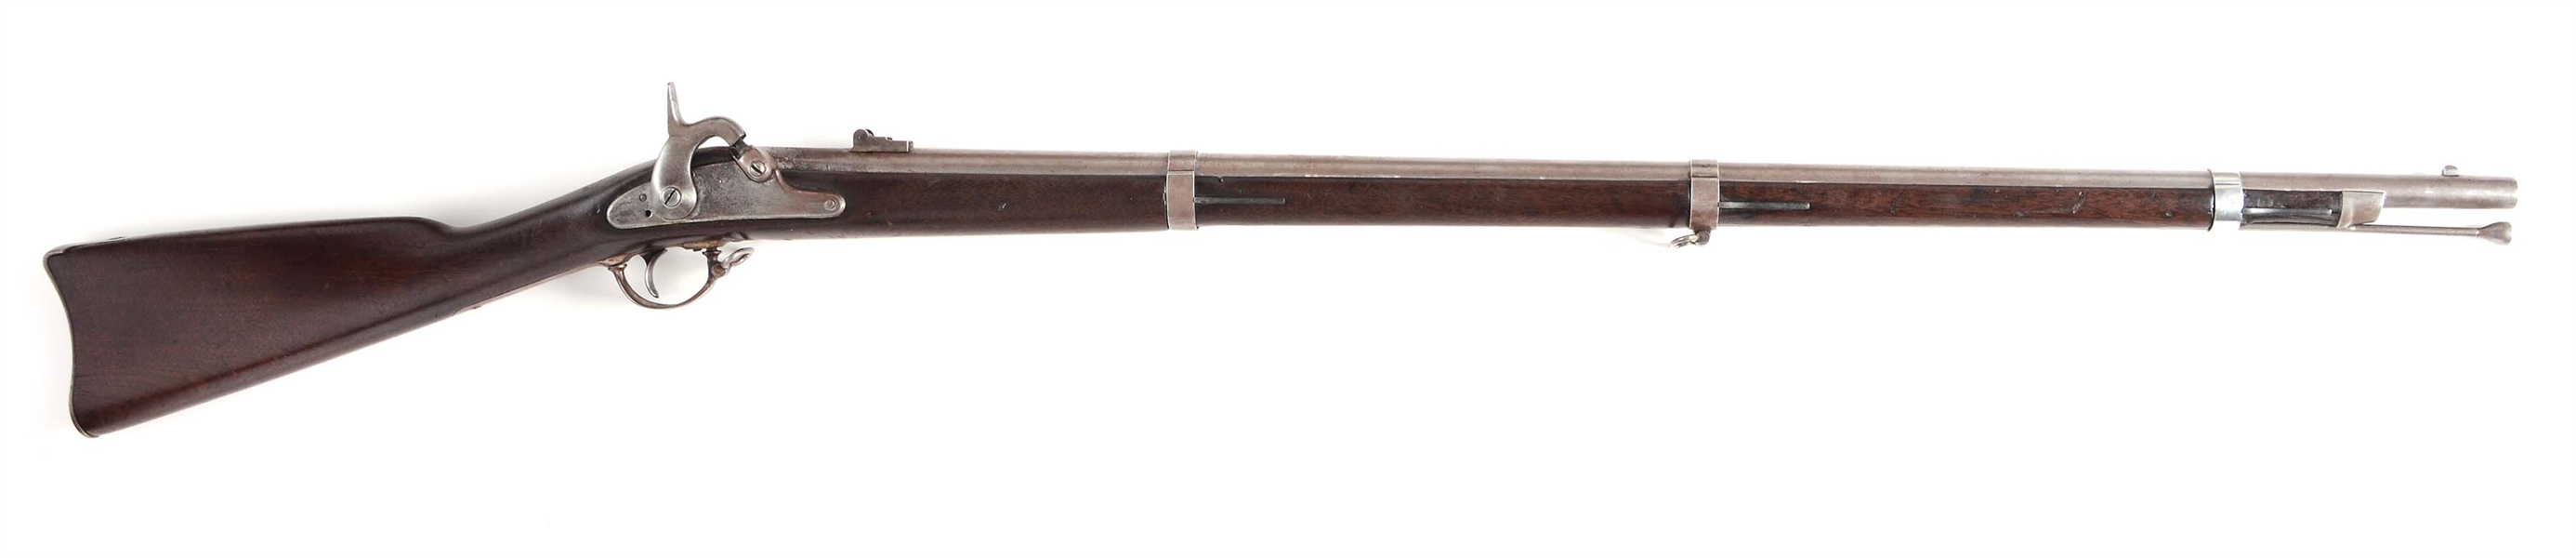 (A) US SPRINGFIELD MODEL 1864 PERCUSSION PROVIDENCE CONTRACT RIFLE.